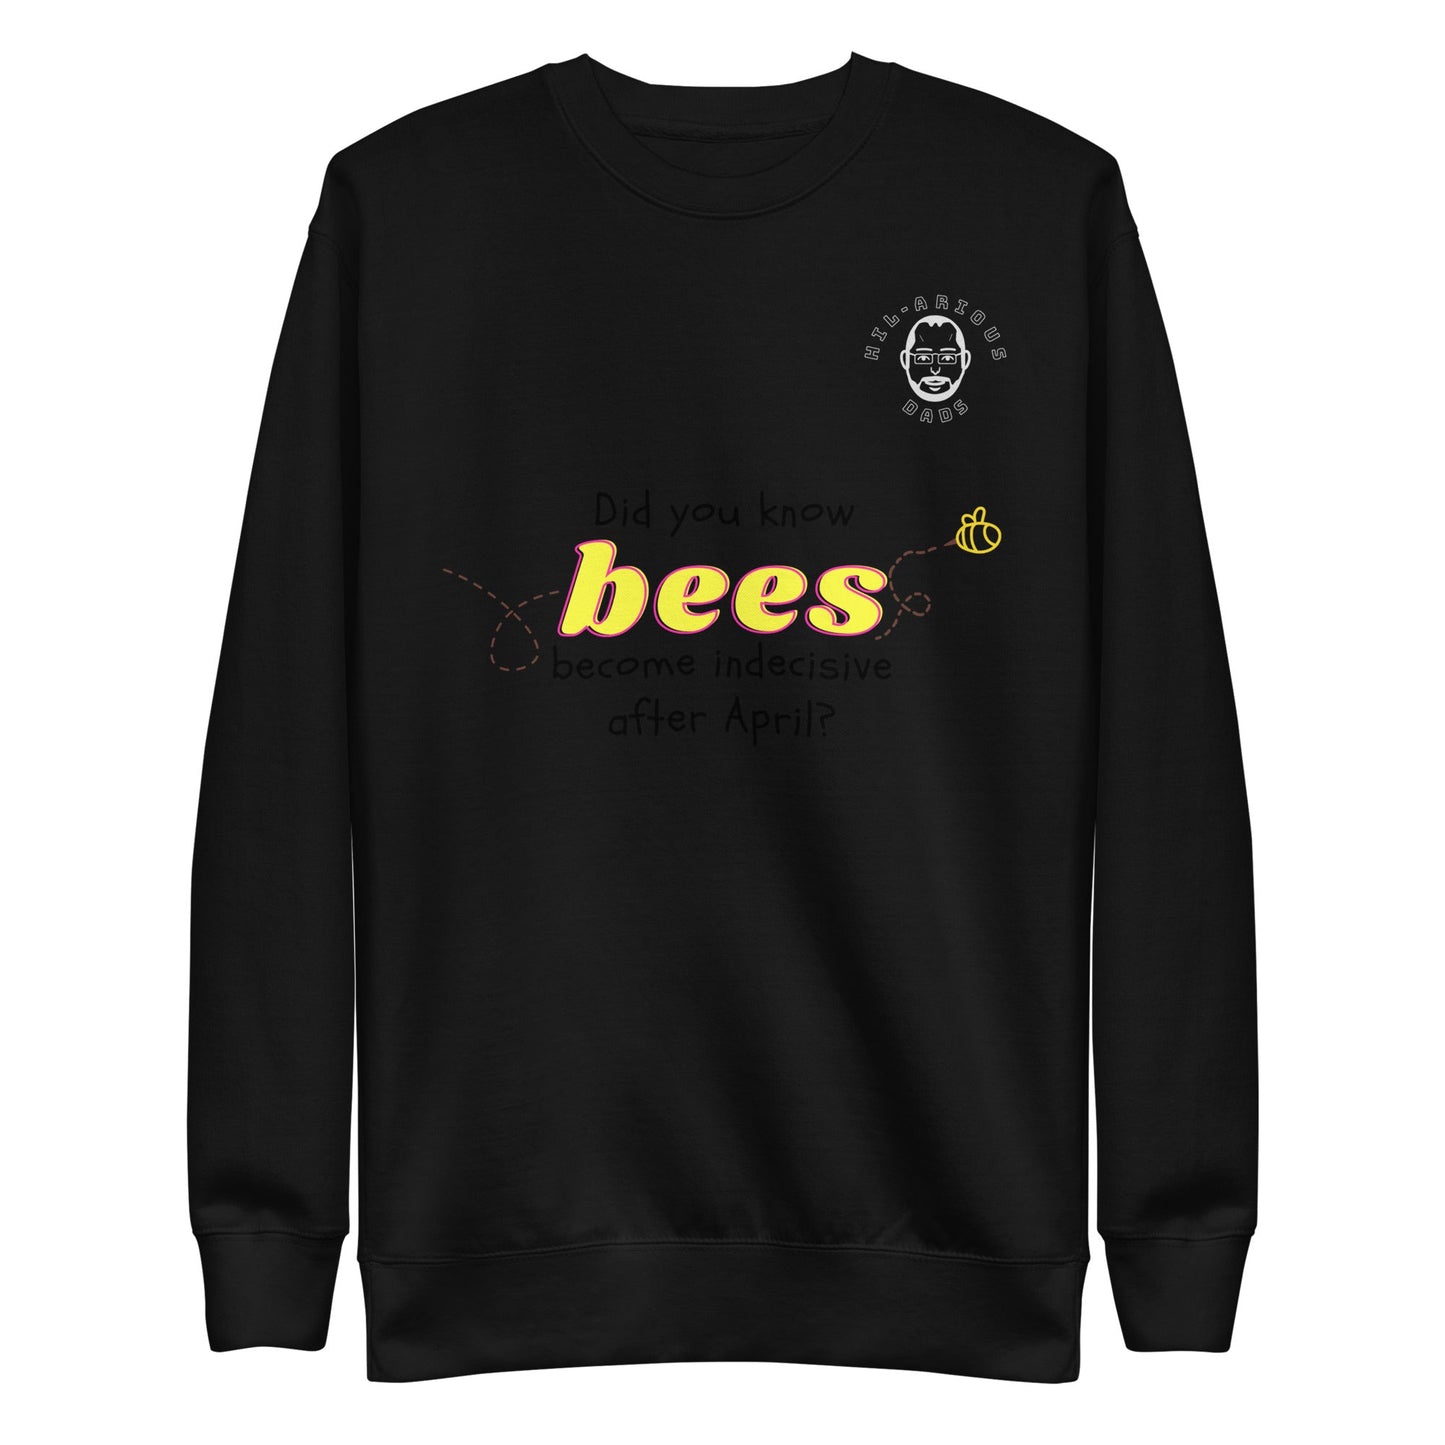 Did you know bees become indecisive after April?-Sweatshirt - Hil-arious Dads